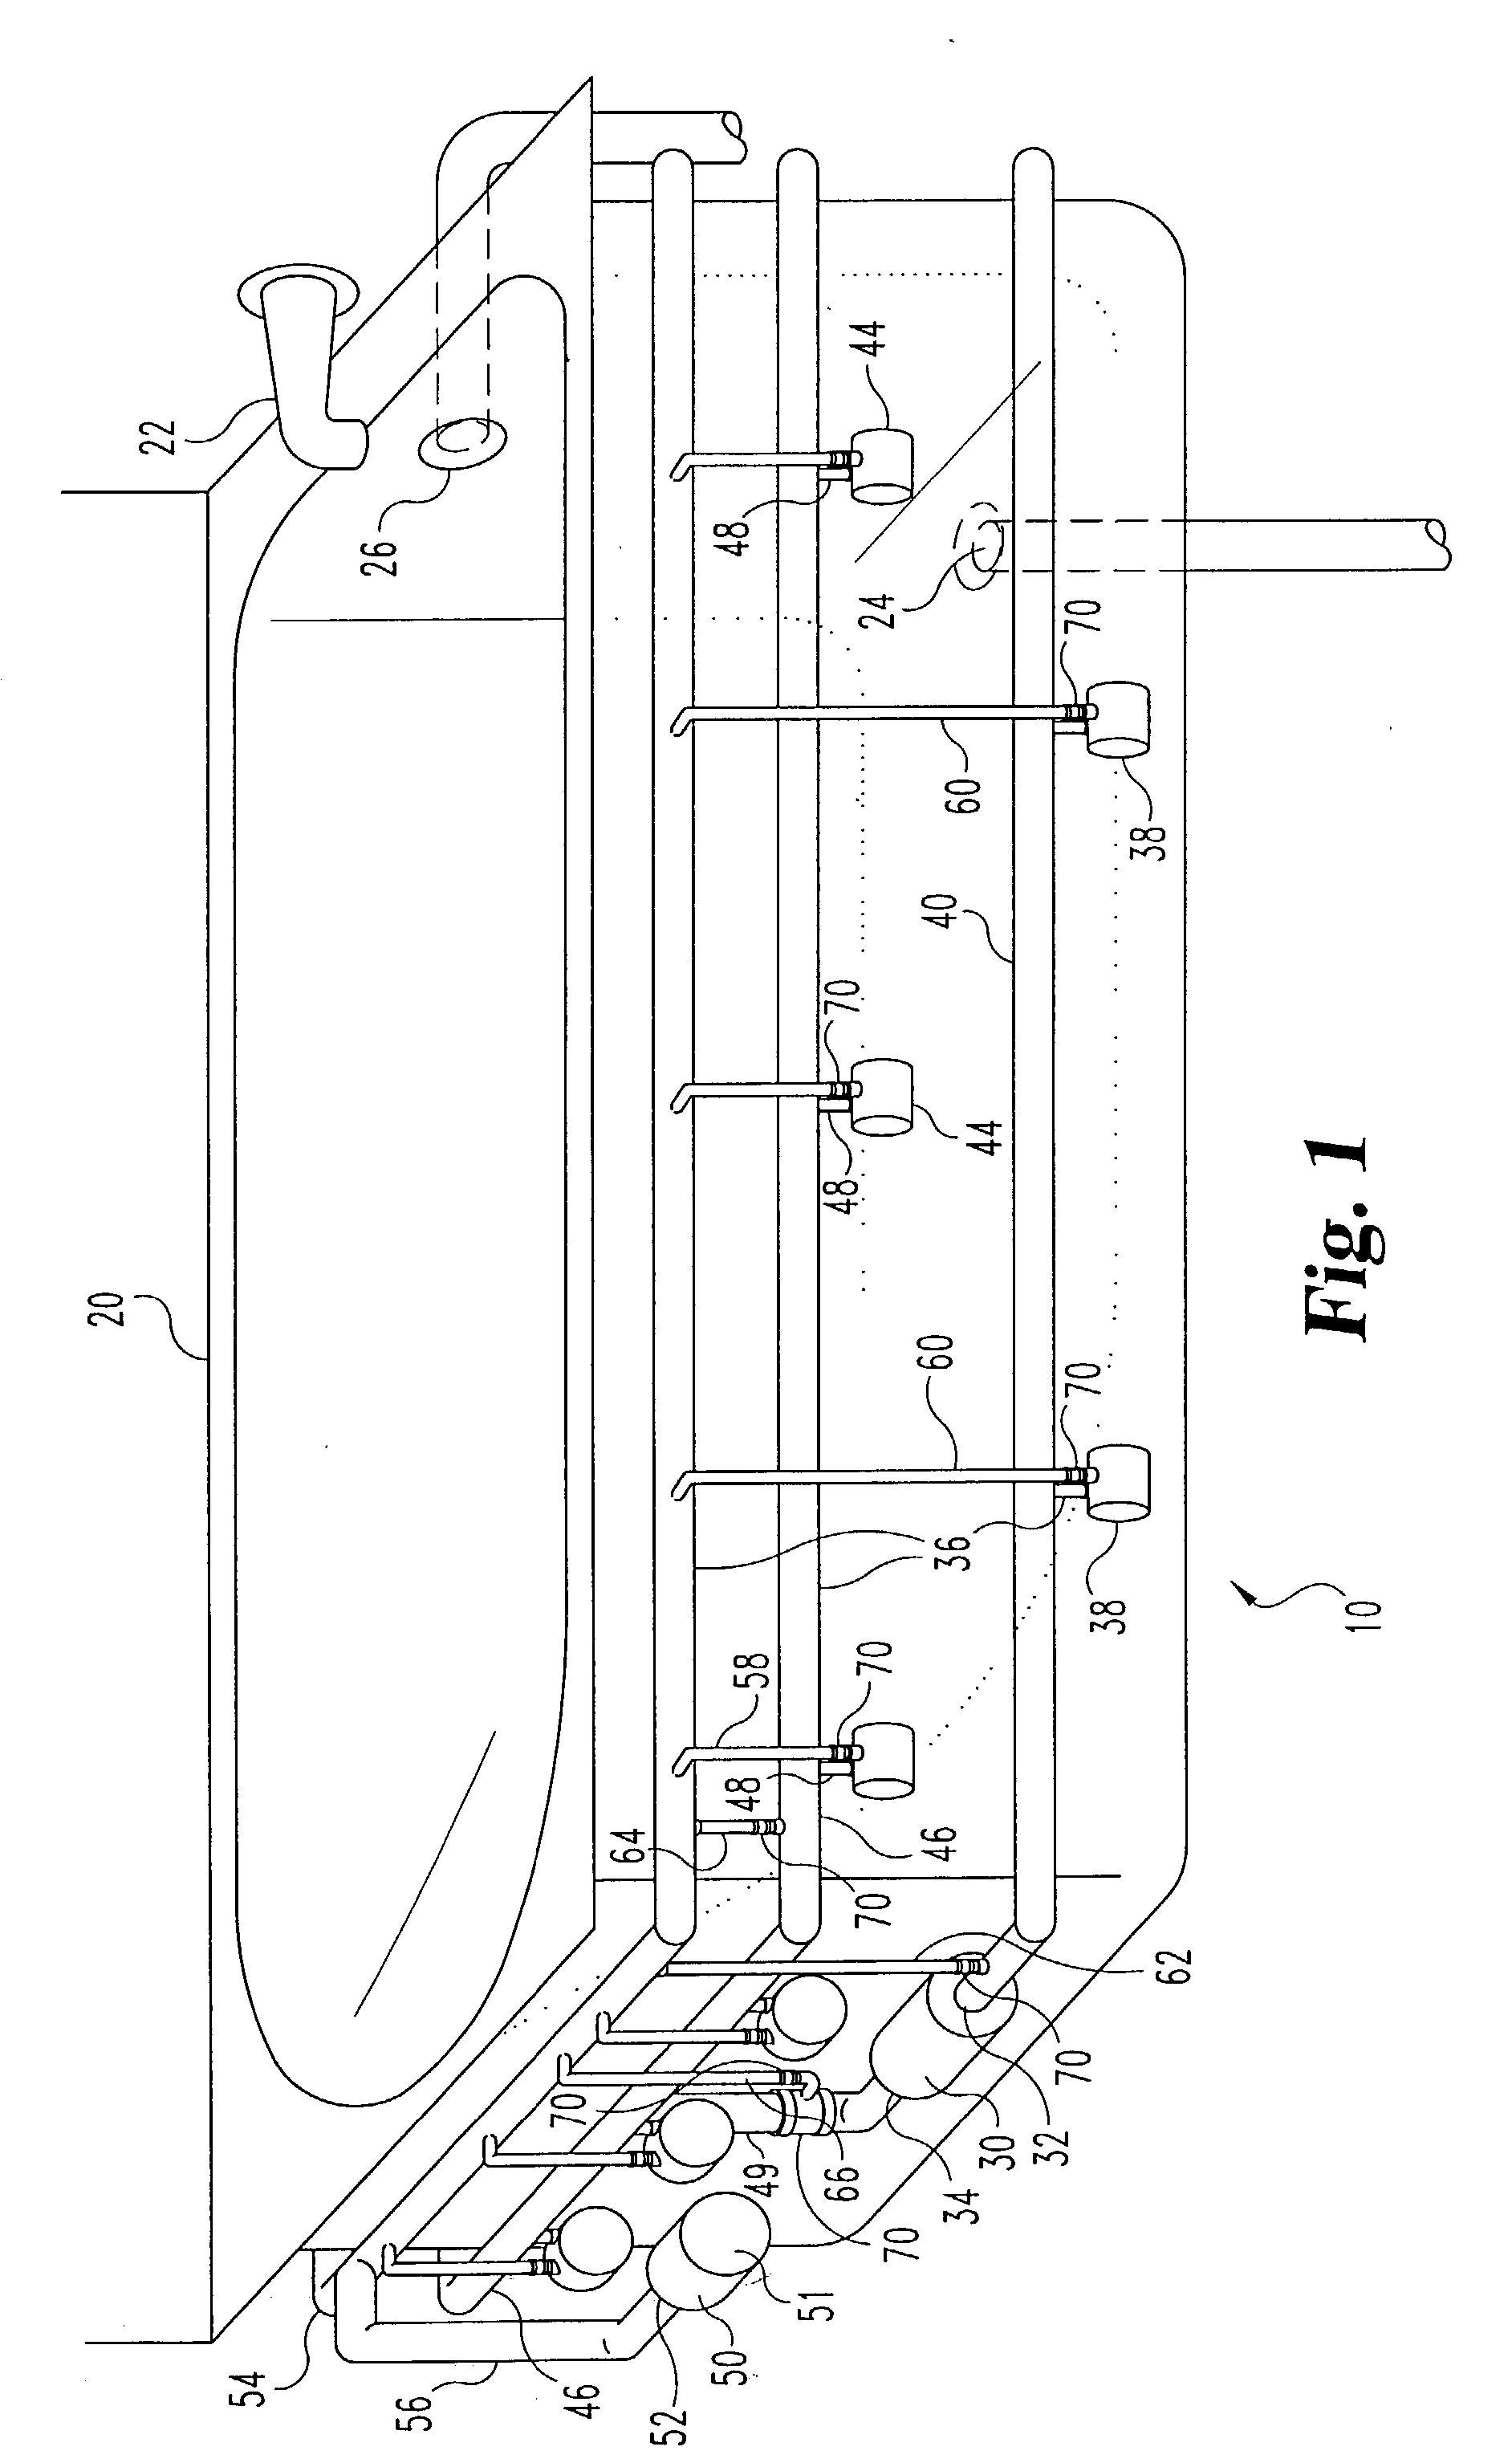 Method and apparatus for automatically disinfecting plumbing fixtures